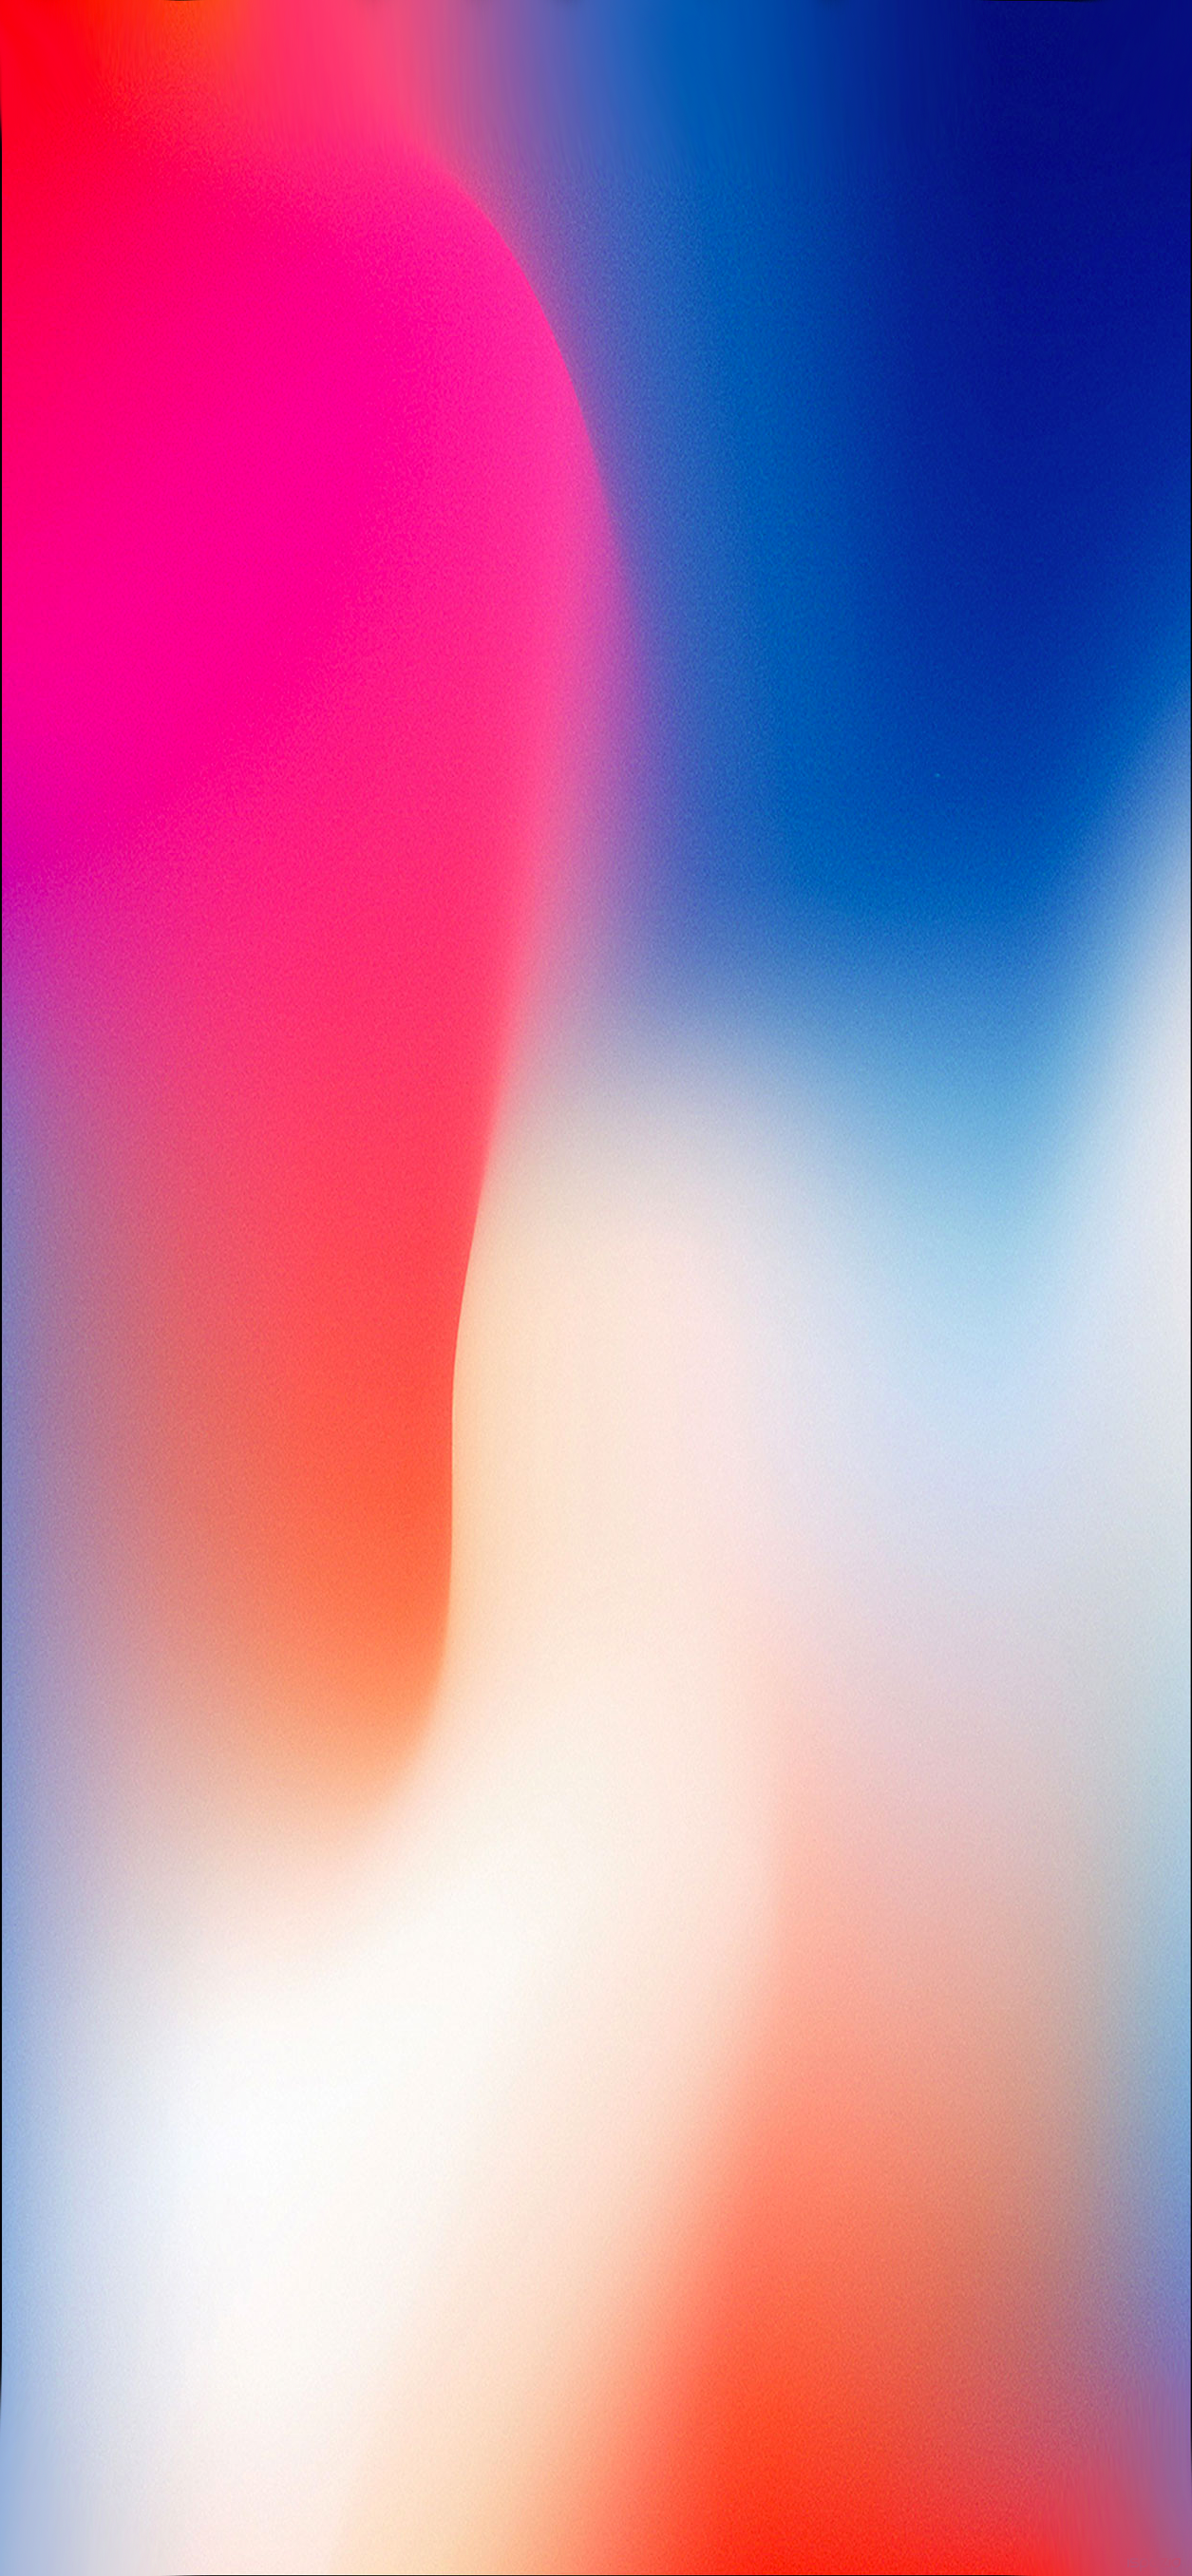 Download iPhone X and iPhone 8 Stock Wallpapers DroidViews